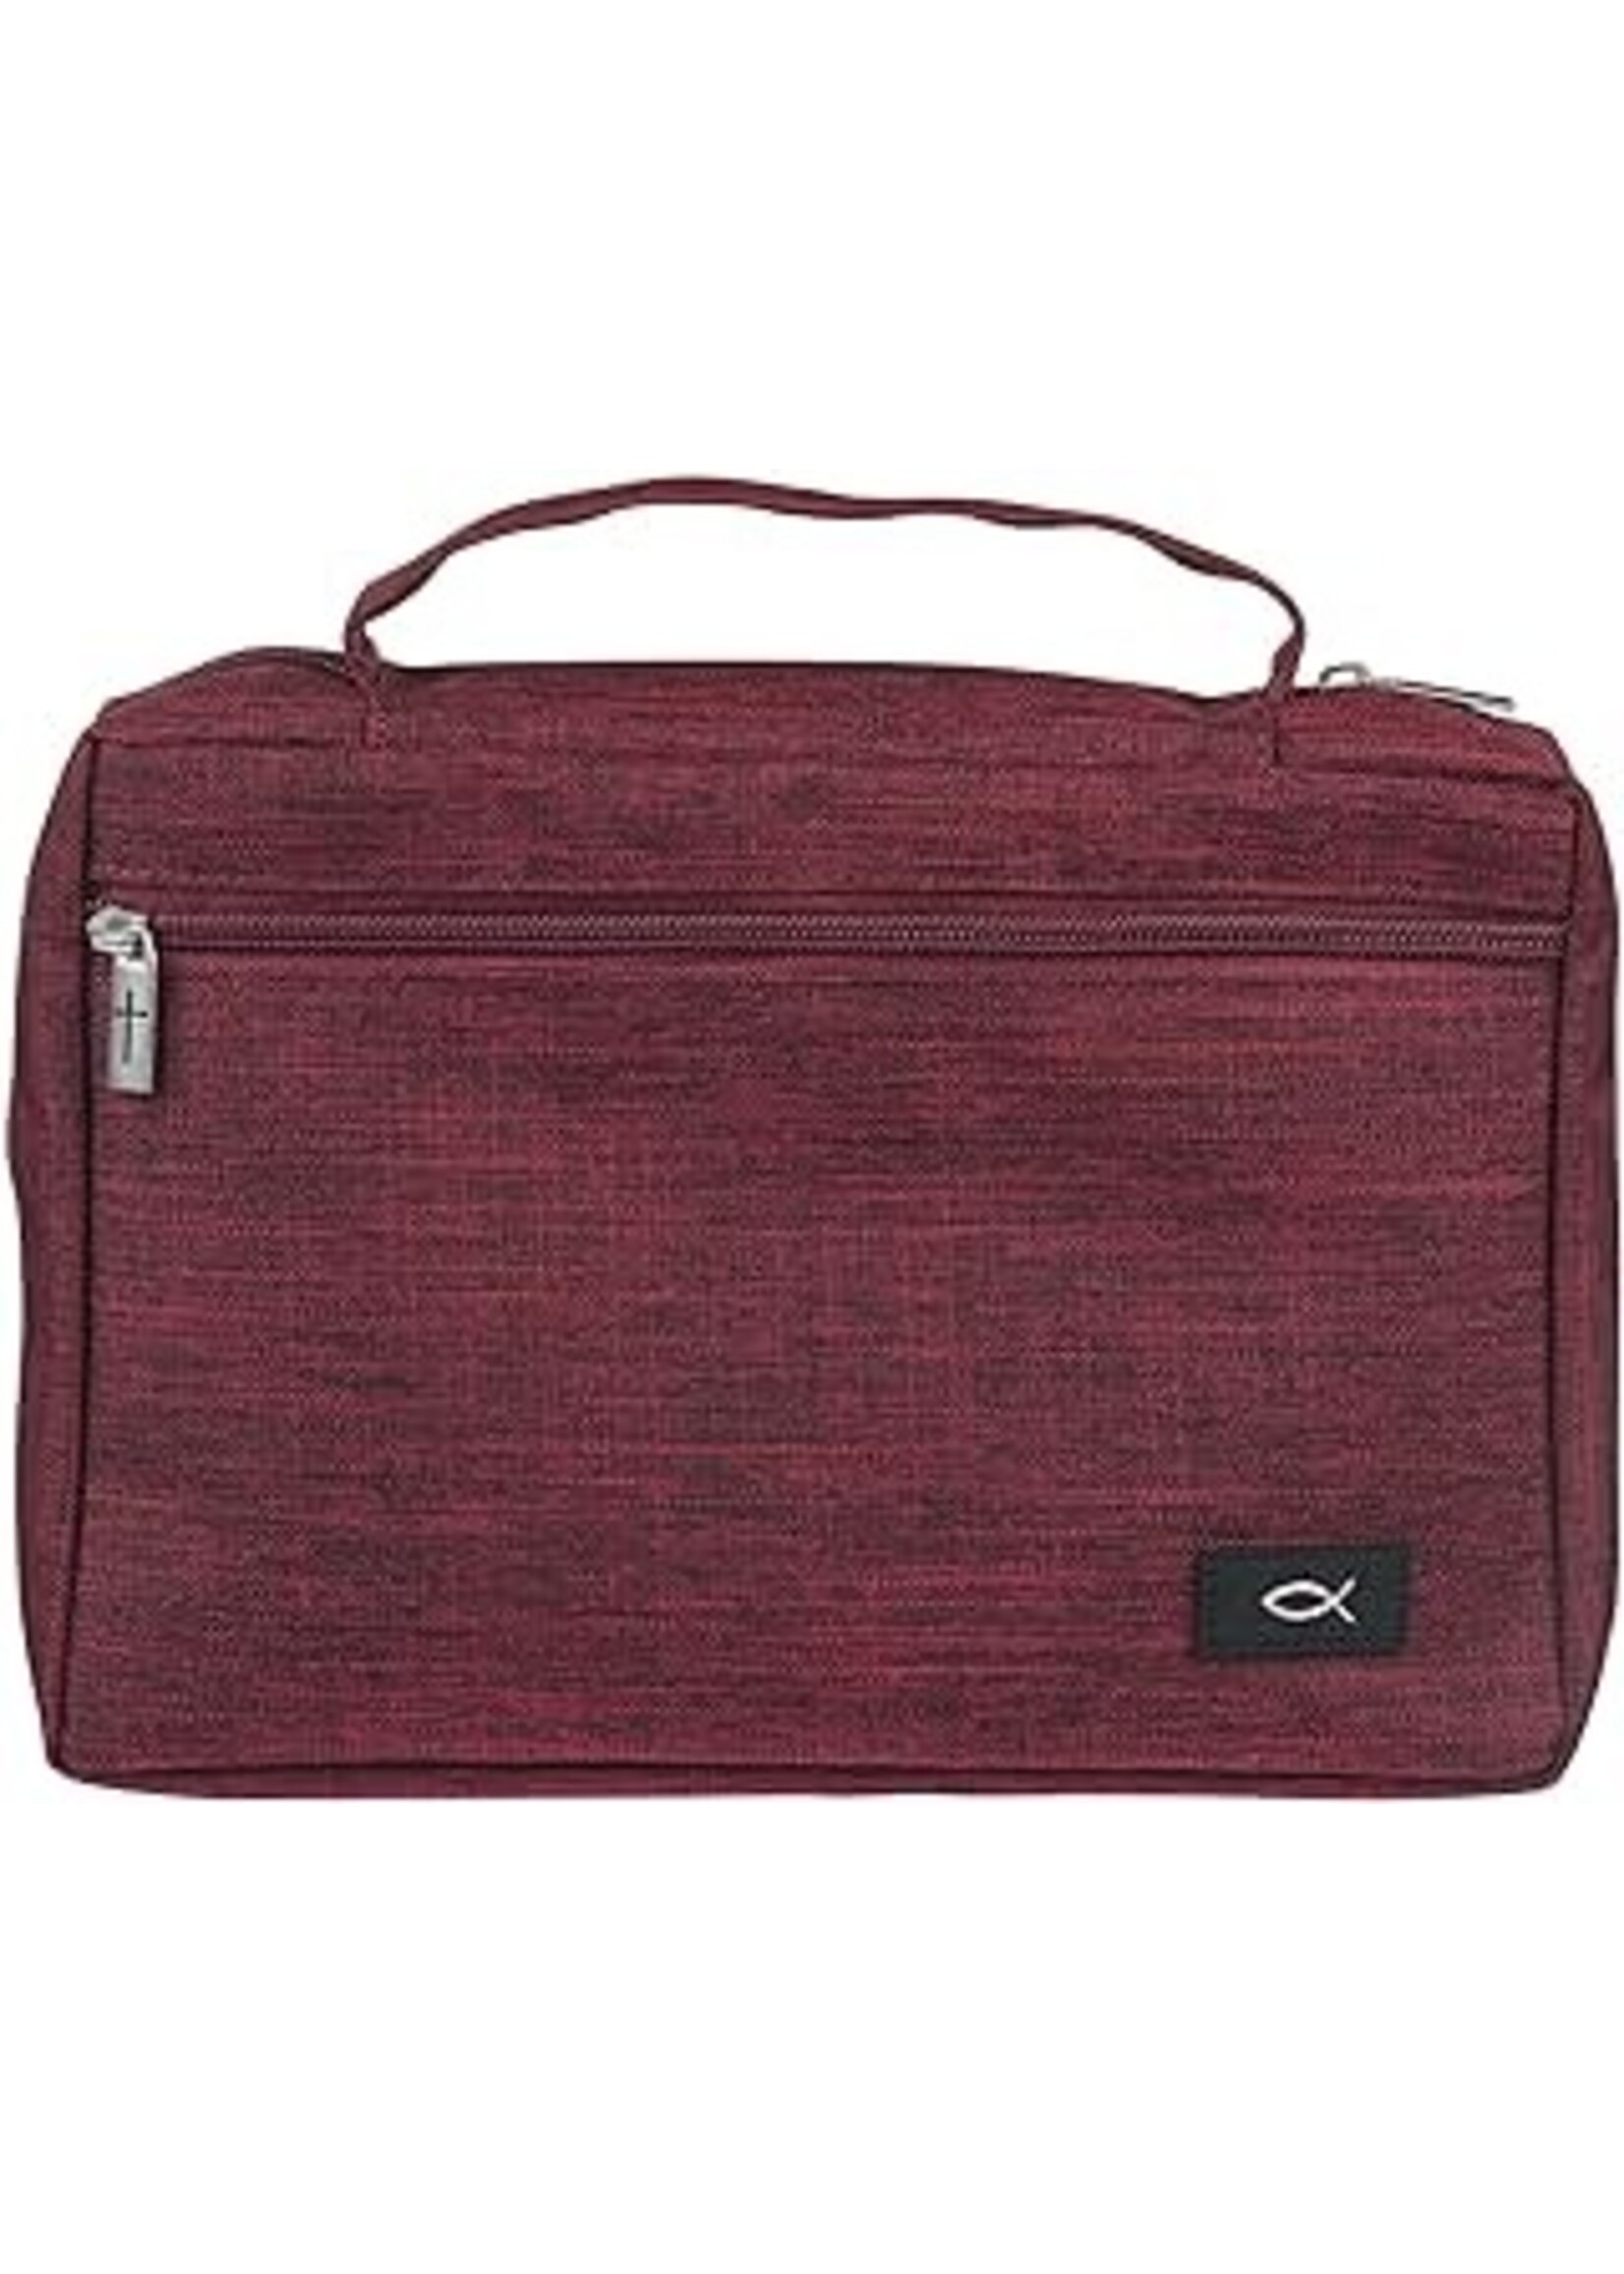 Bible Cover Burgundy